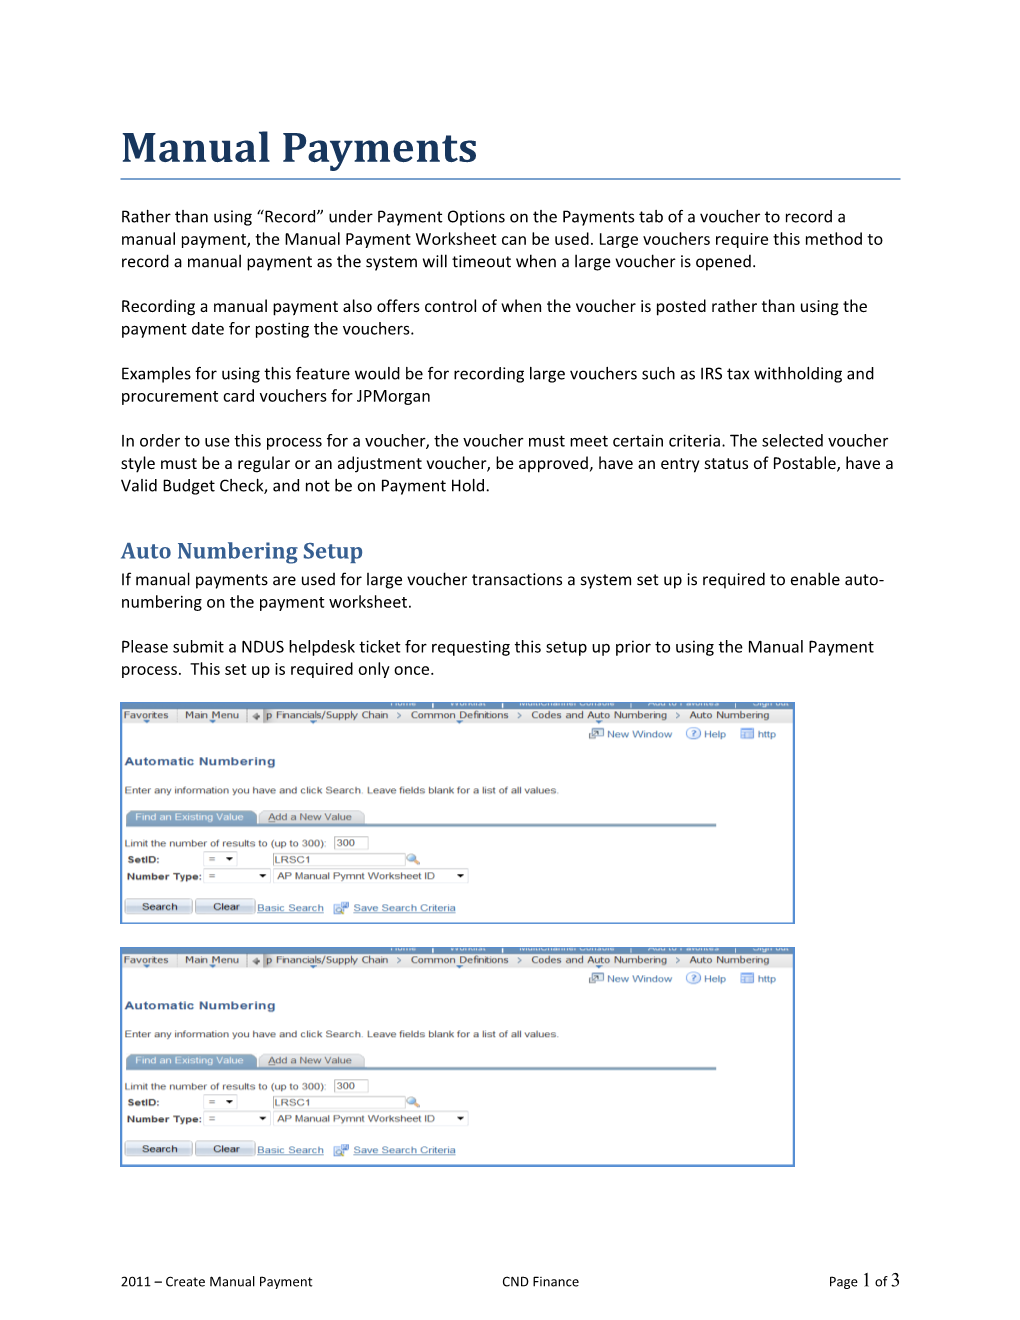 Manual Payments